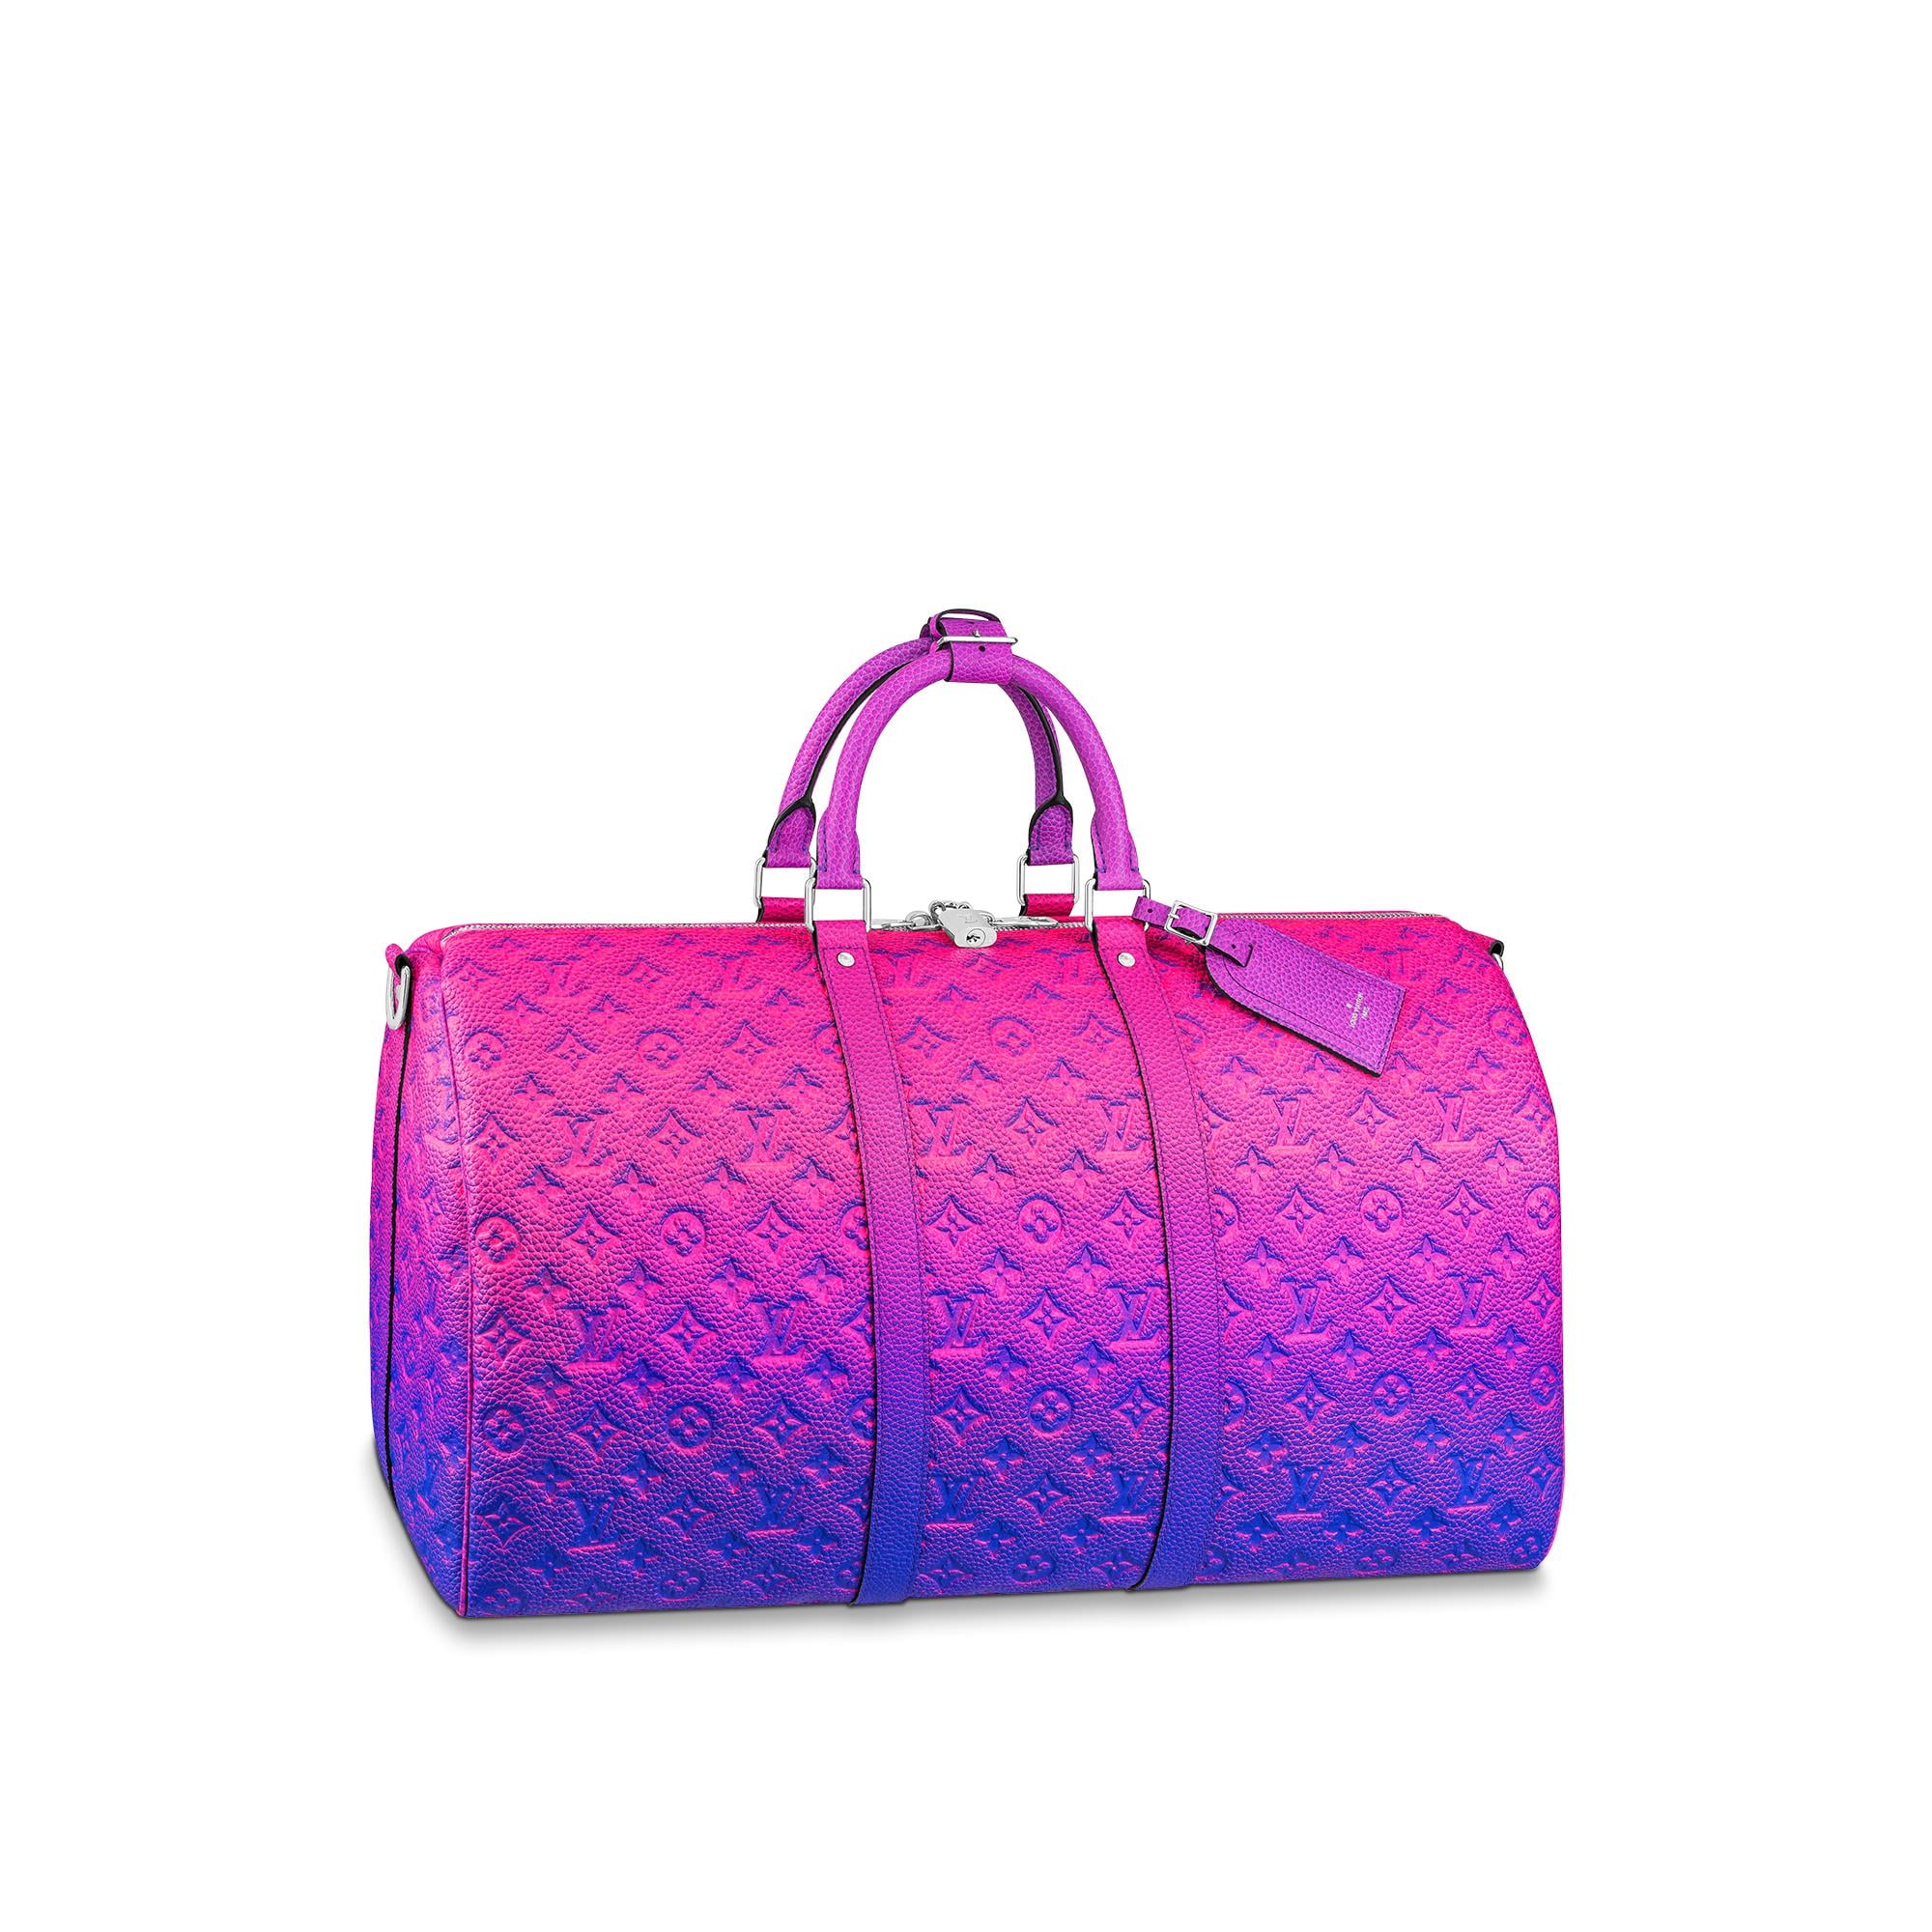 Louis Vuitton Eole 50 - Super Classy Boston Bag Carry on - A Review -  whattodotomorrow